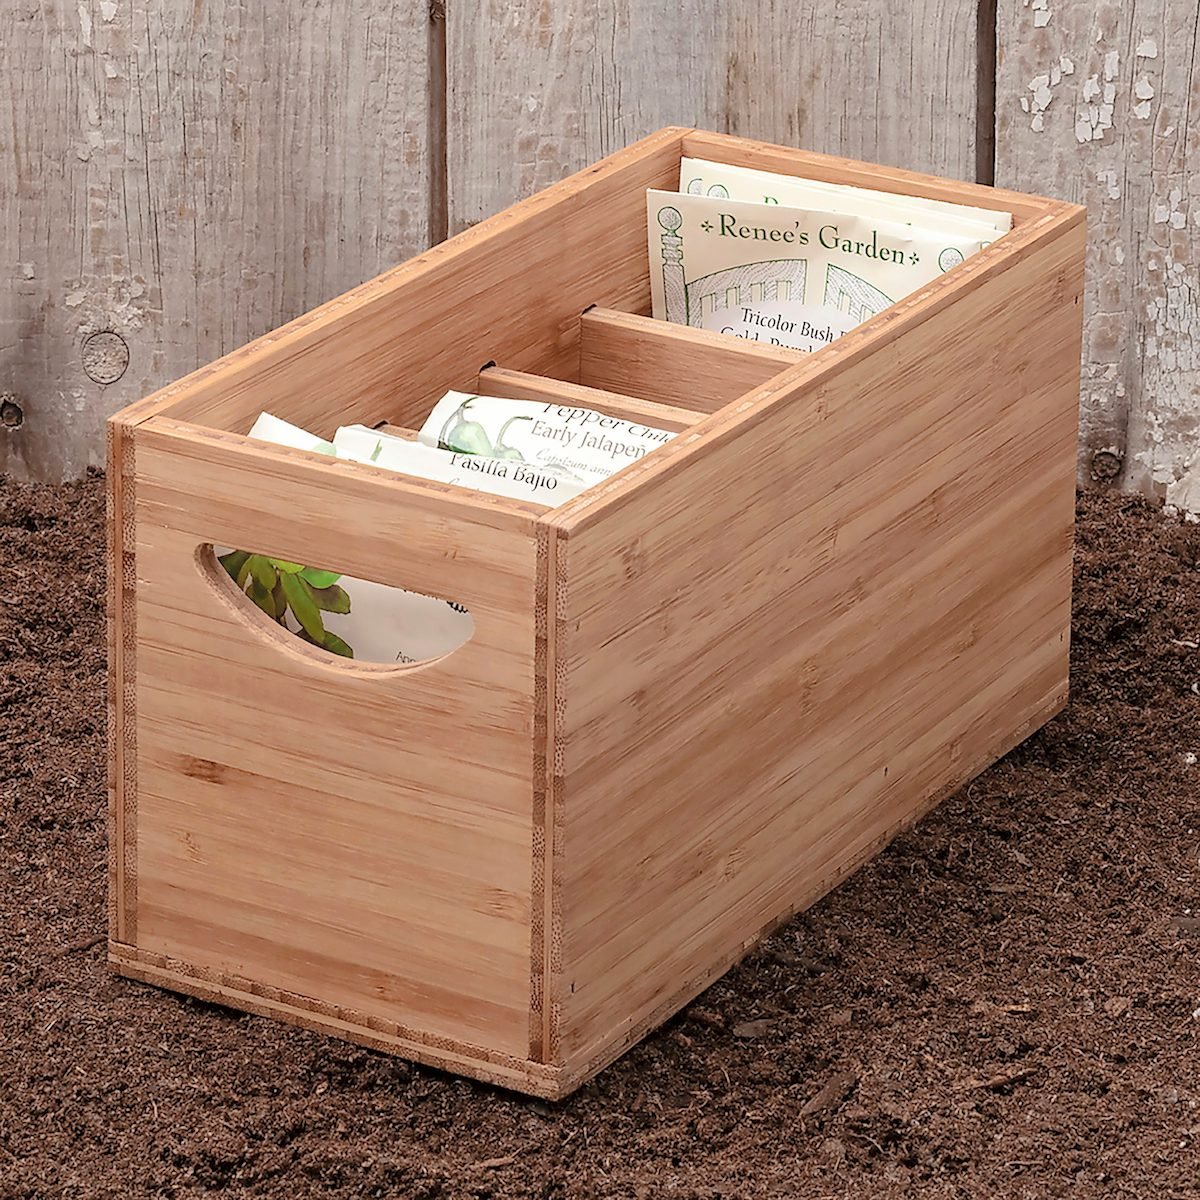 How to Use Photo Storage Boxes to Store Seeds - Gardening